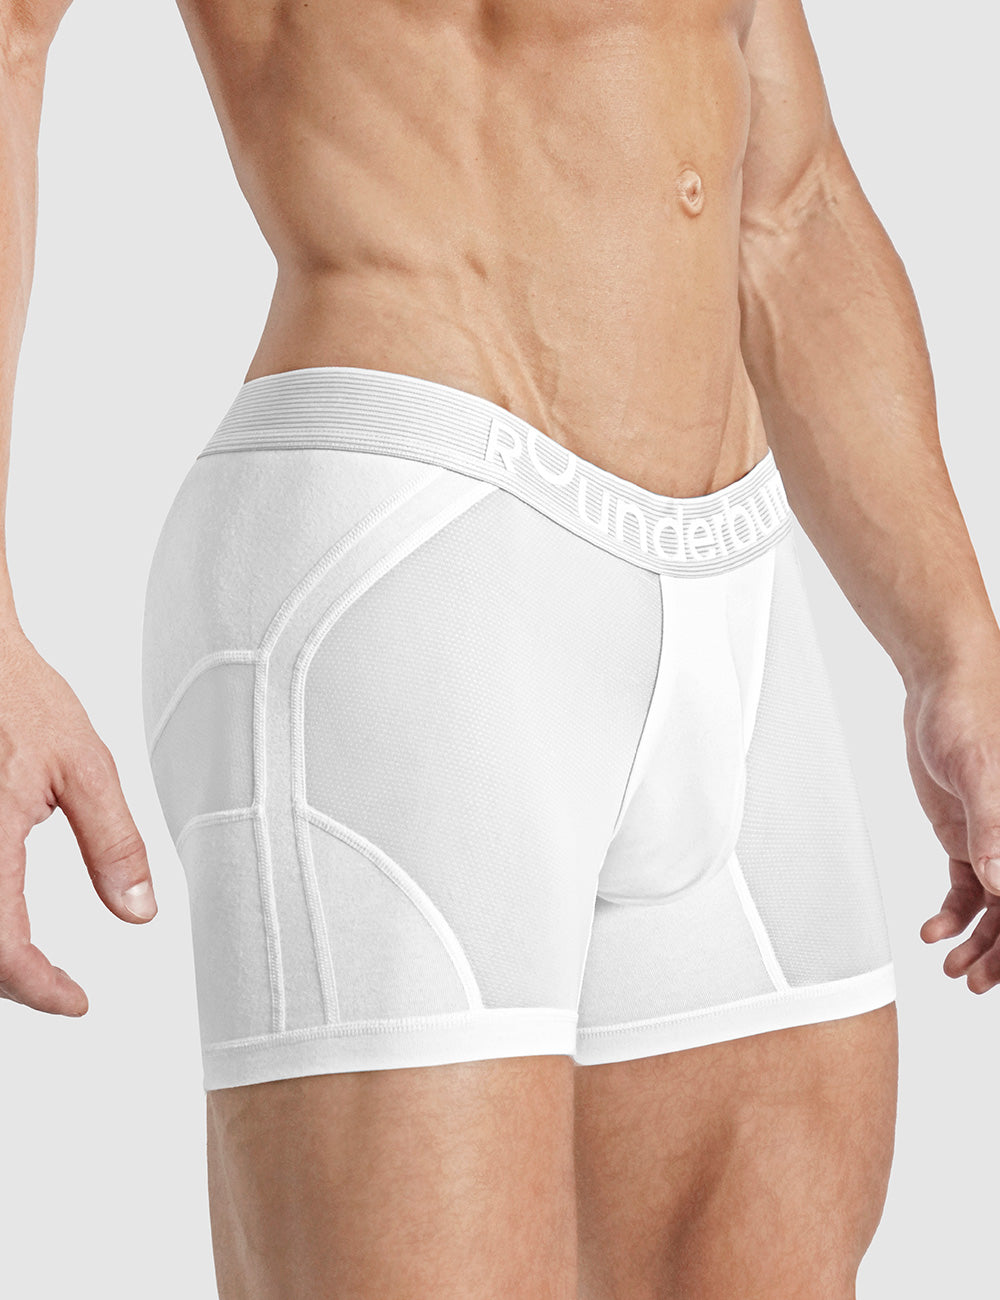 Obviously Anatomical Pouch Low Rise Boxer Briefs White MCA011 at